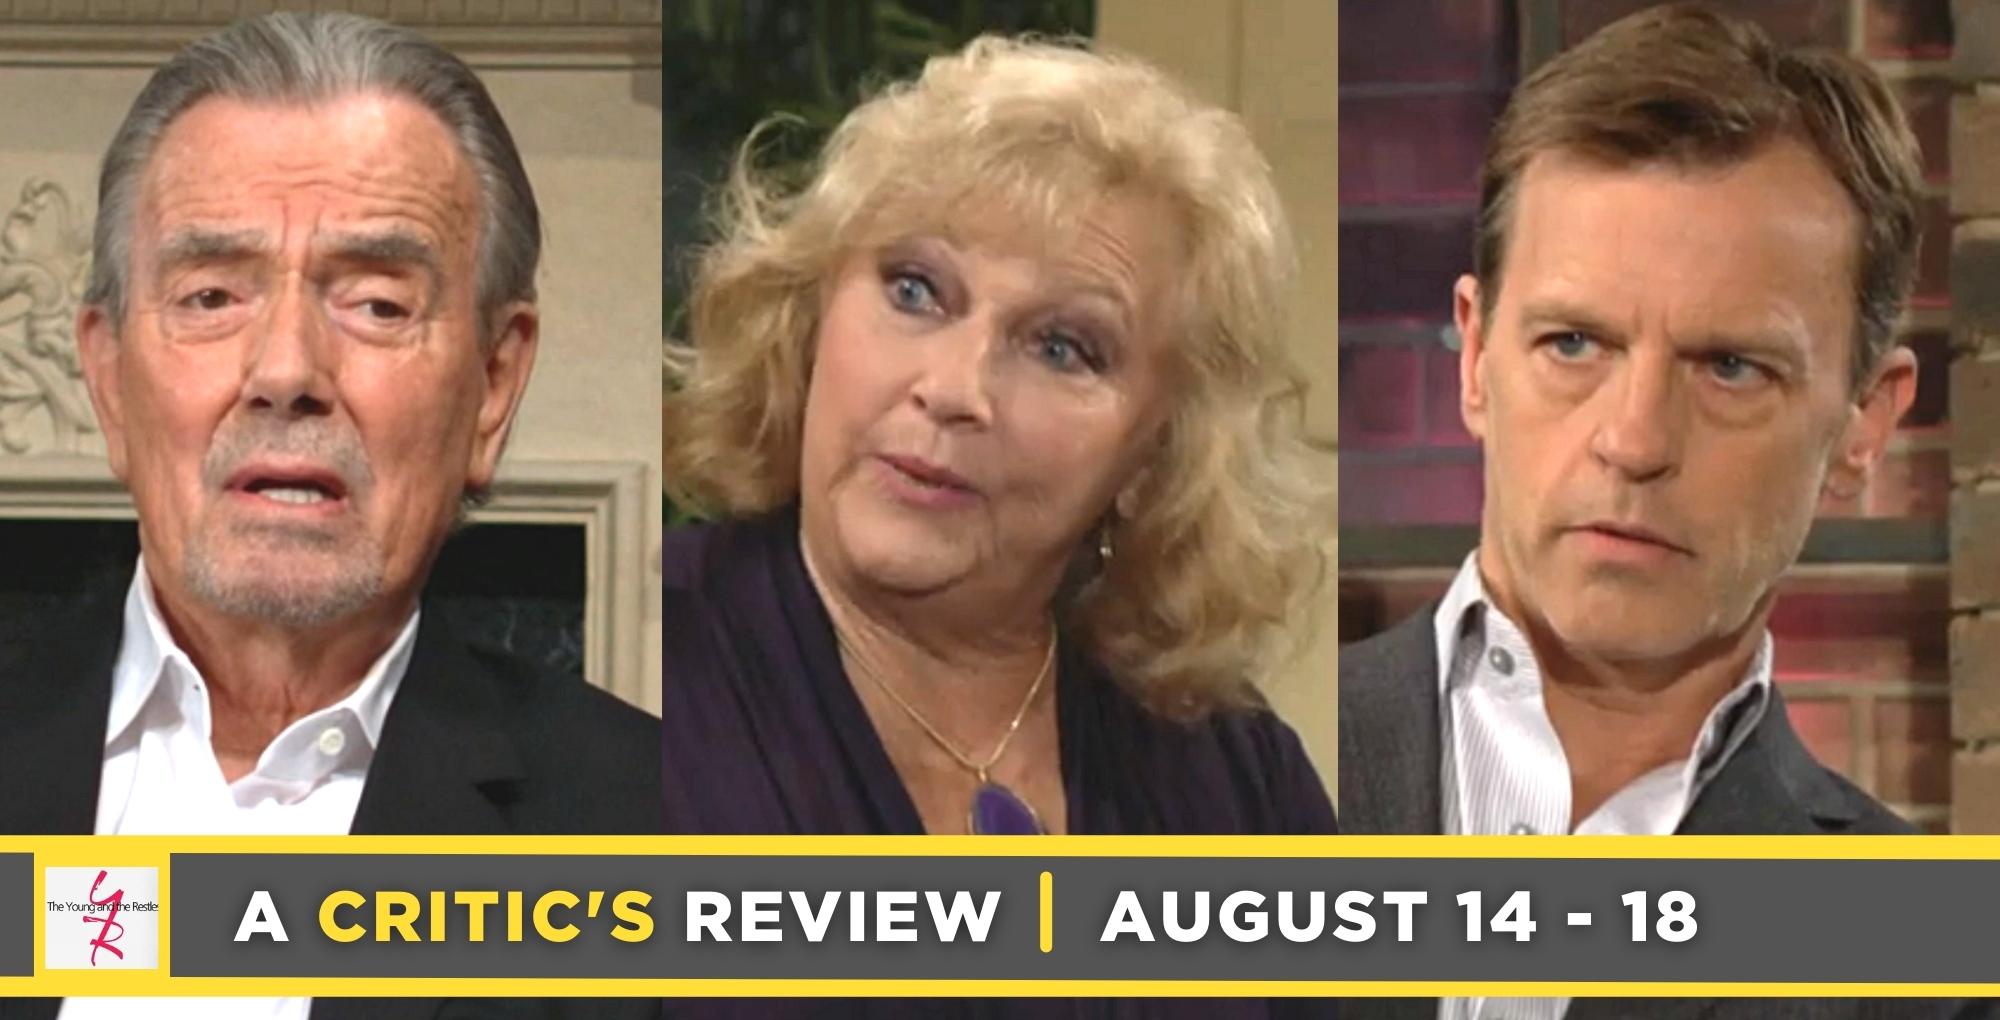 the young and the restless critic's review for august 14 – august 18, 2023, three images, victor, traci, and tucker.